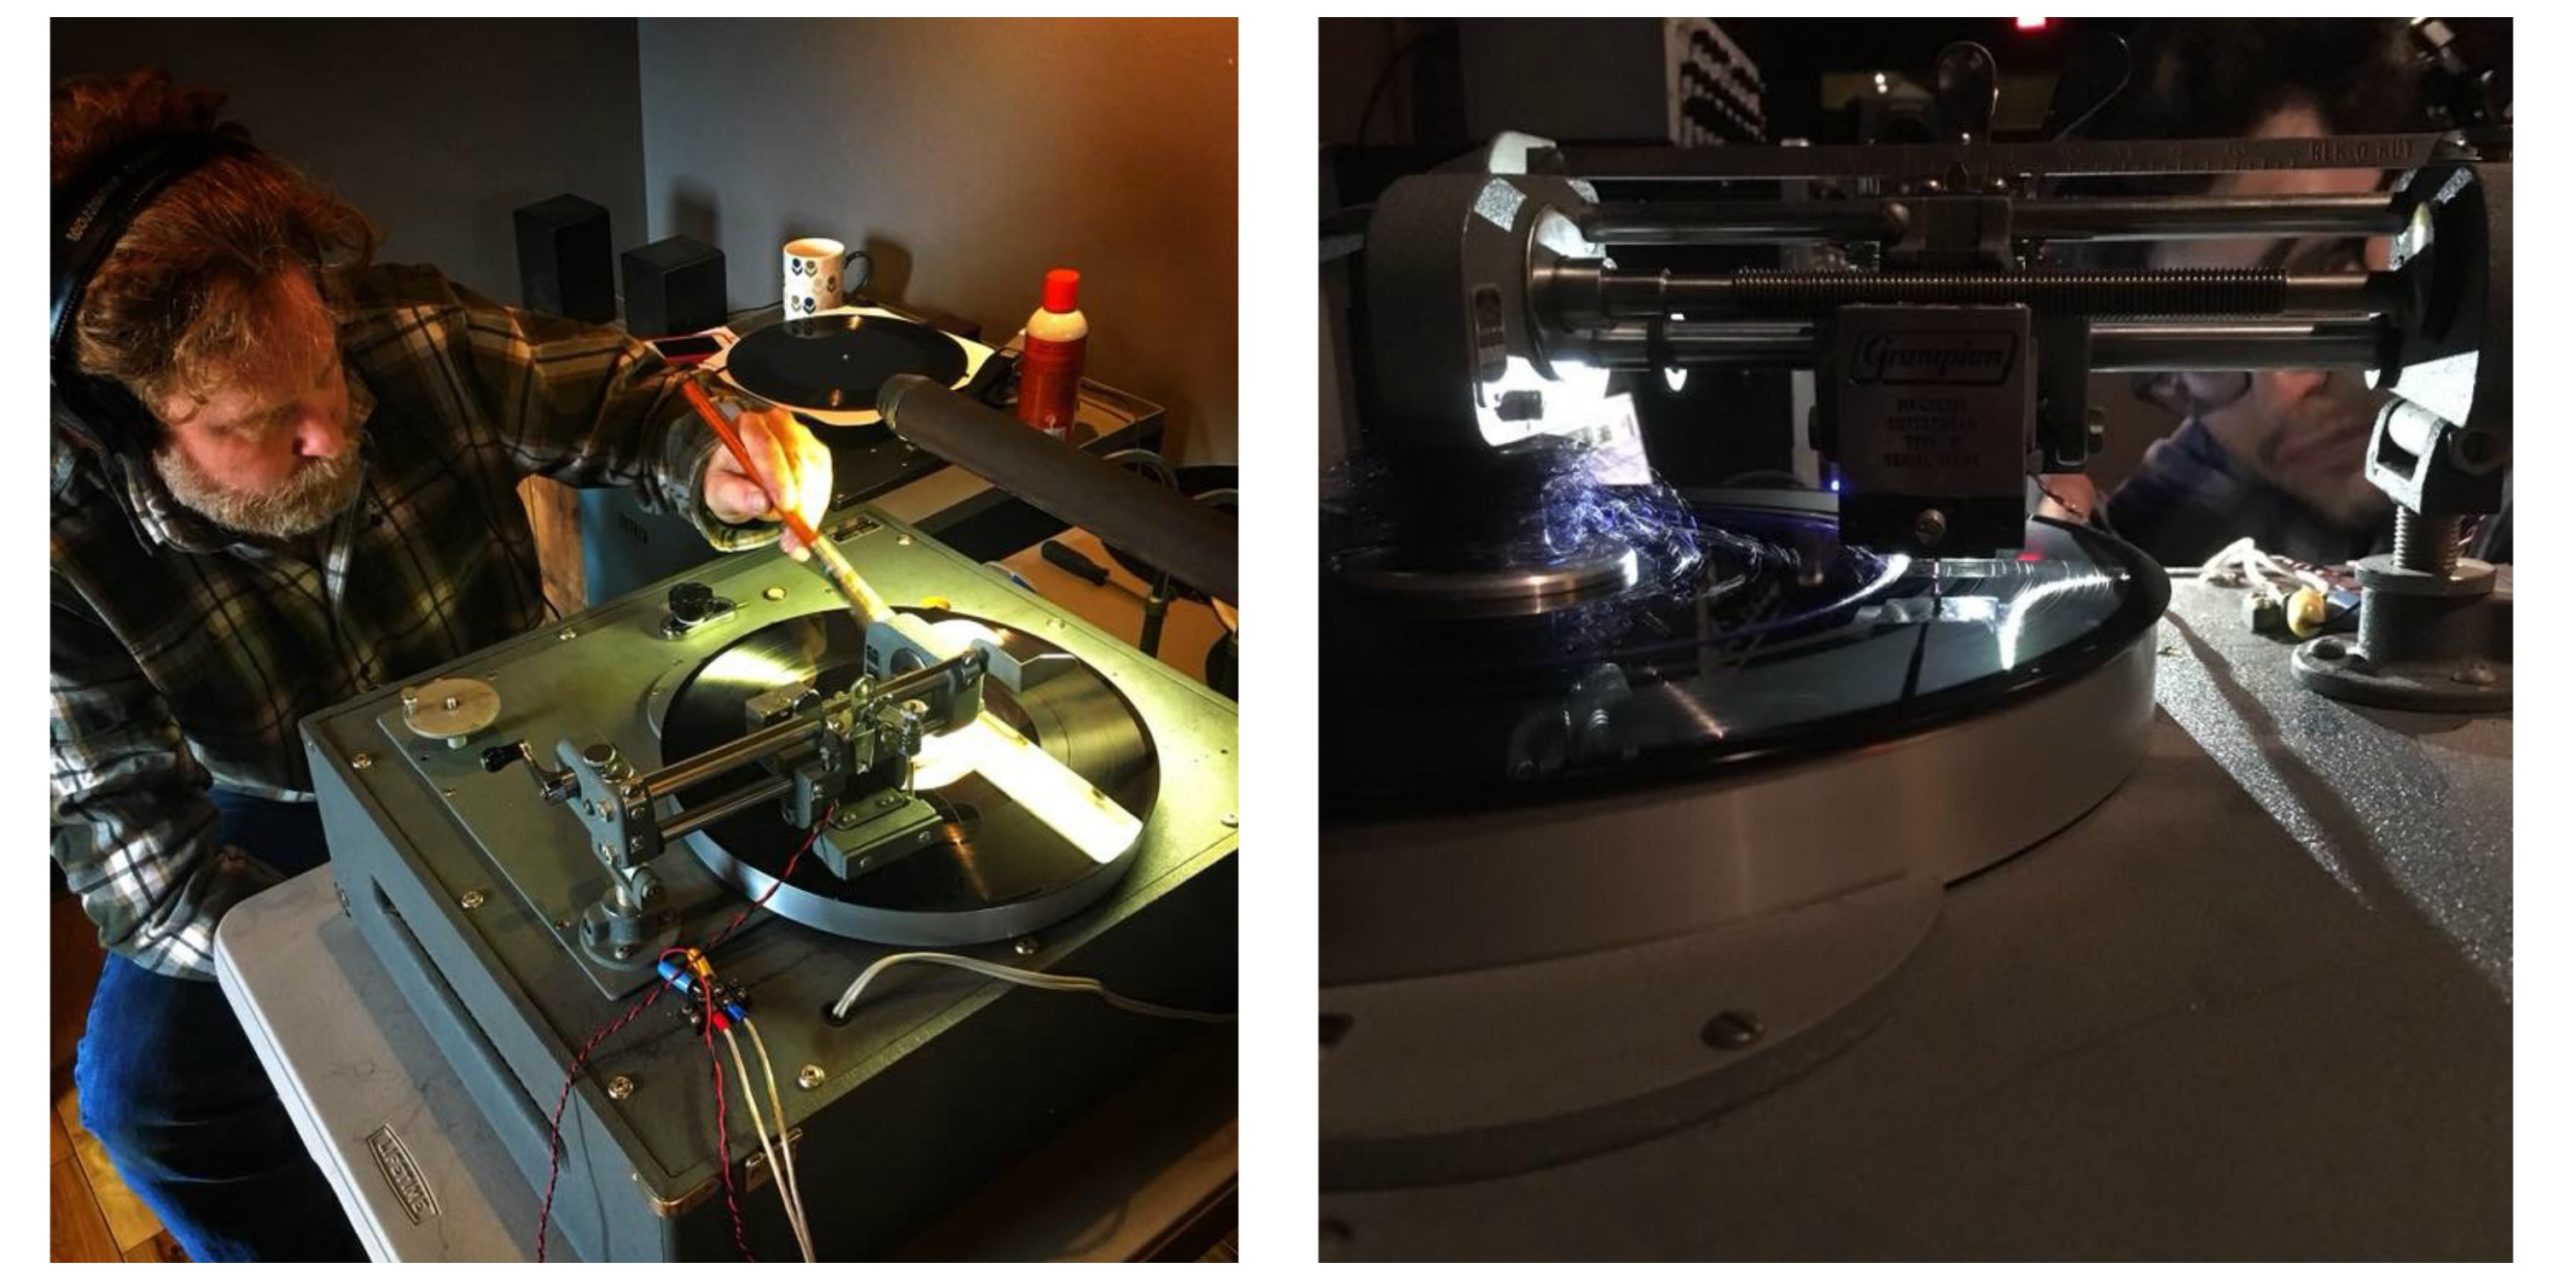 The picture to the left shows the author brushing a cut record as it spins on the lathe; the picture to the left shows a man peering into the inner workings of the machine cutting the record master.